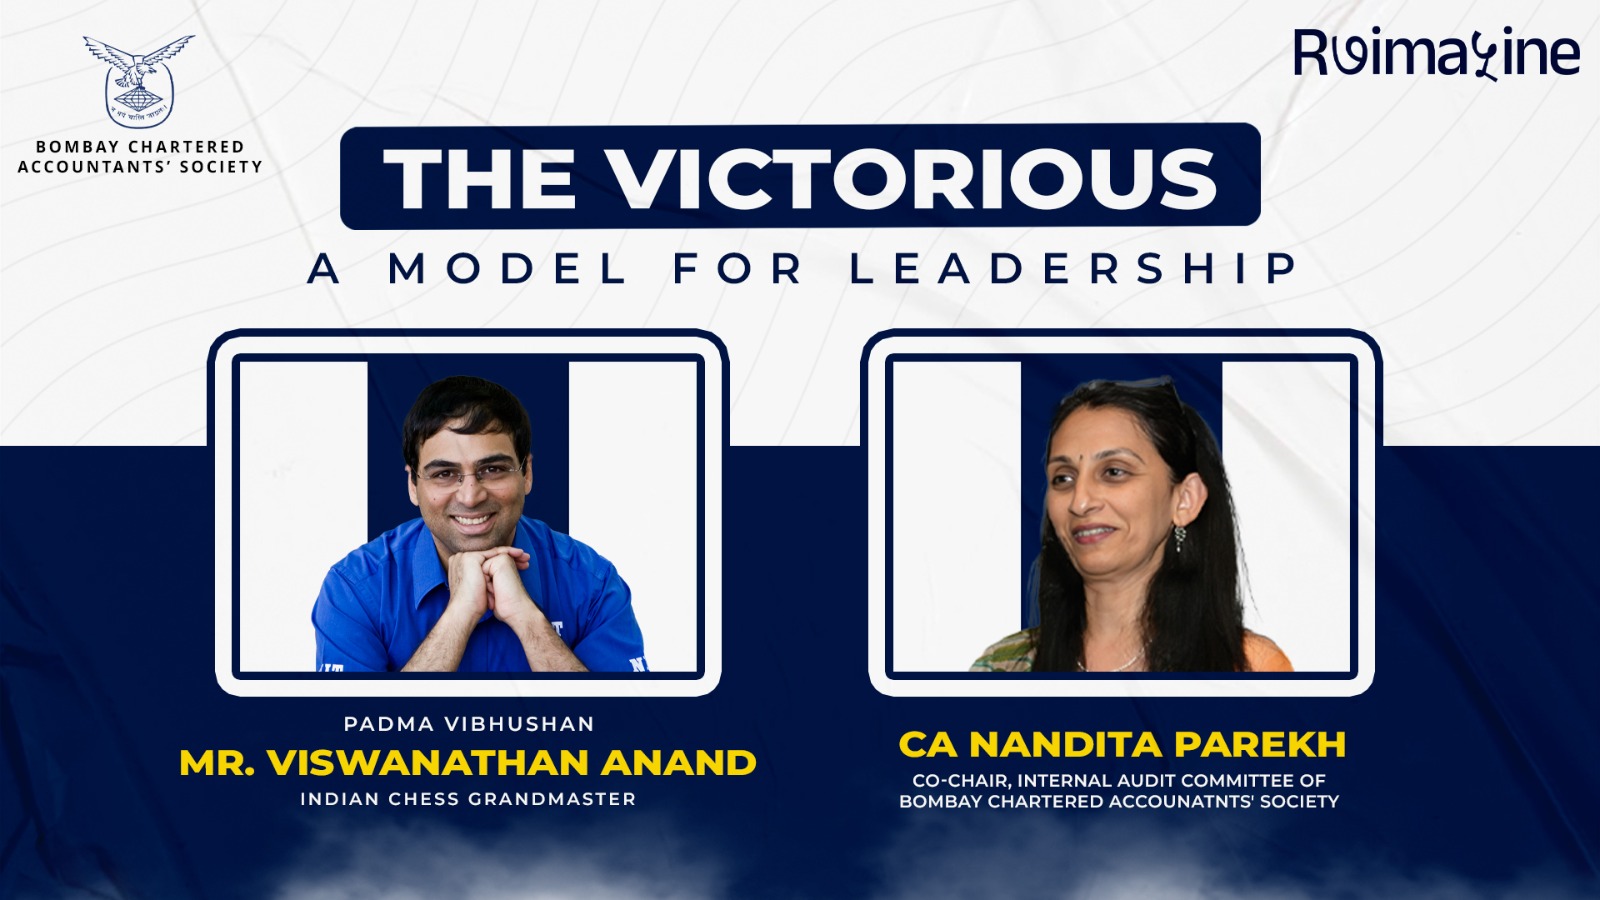 The Victorious – A Model for Leadership